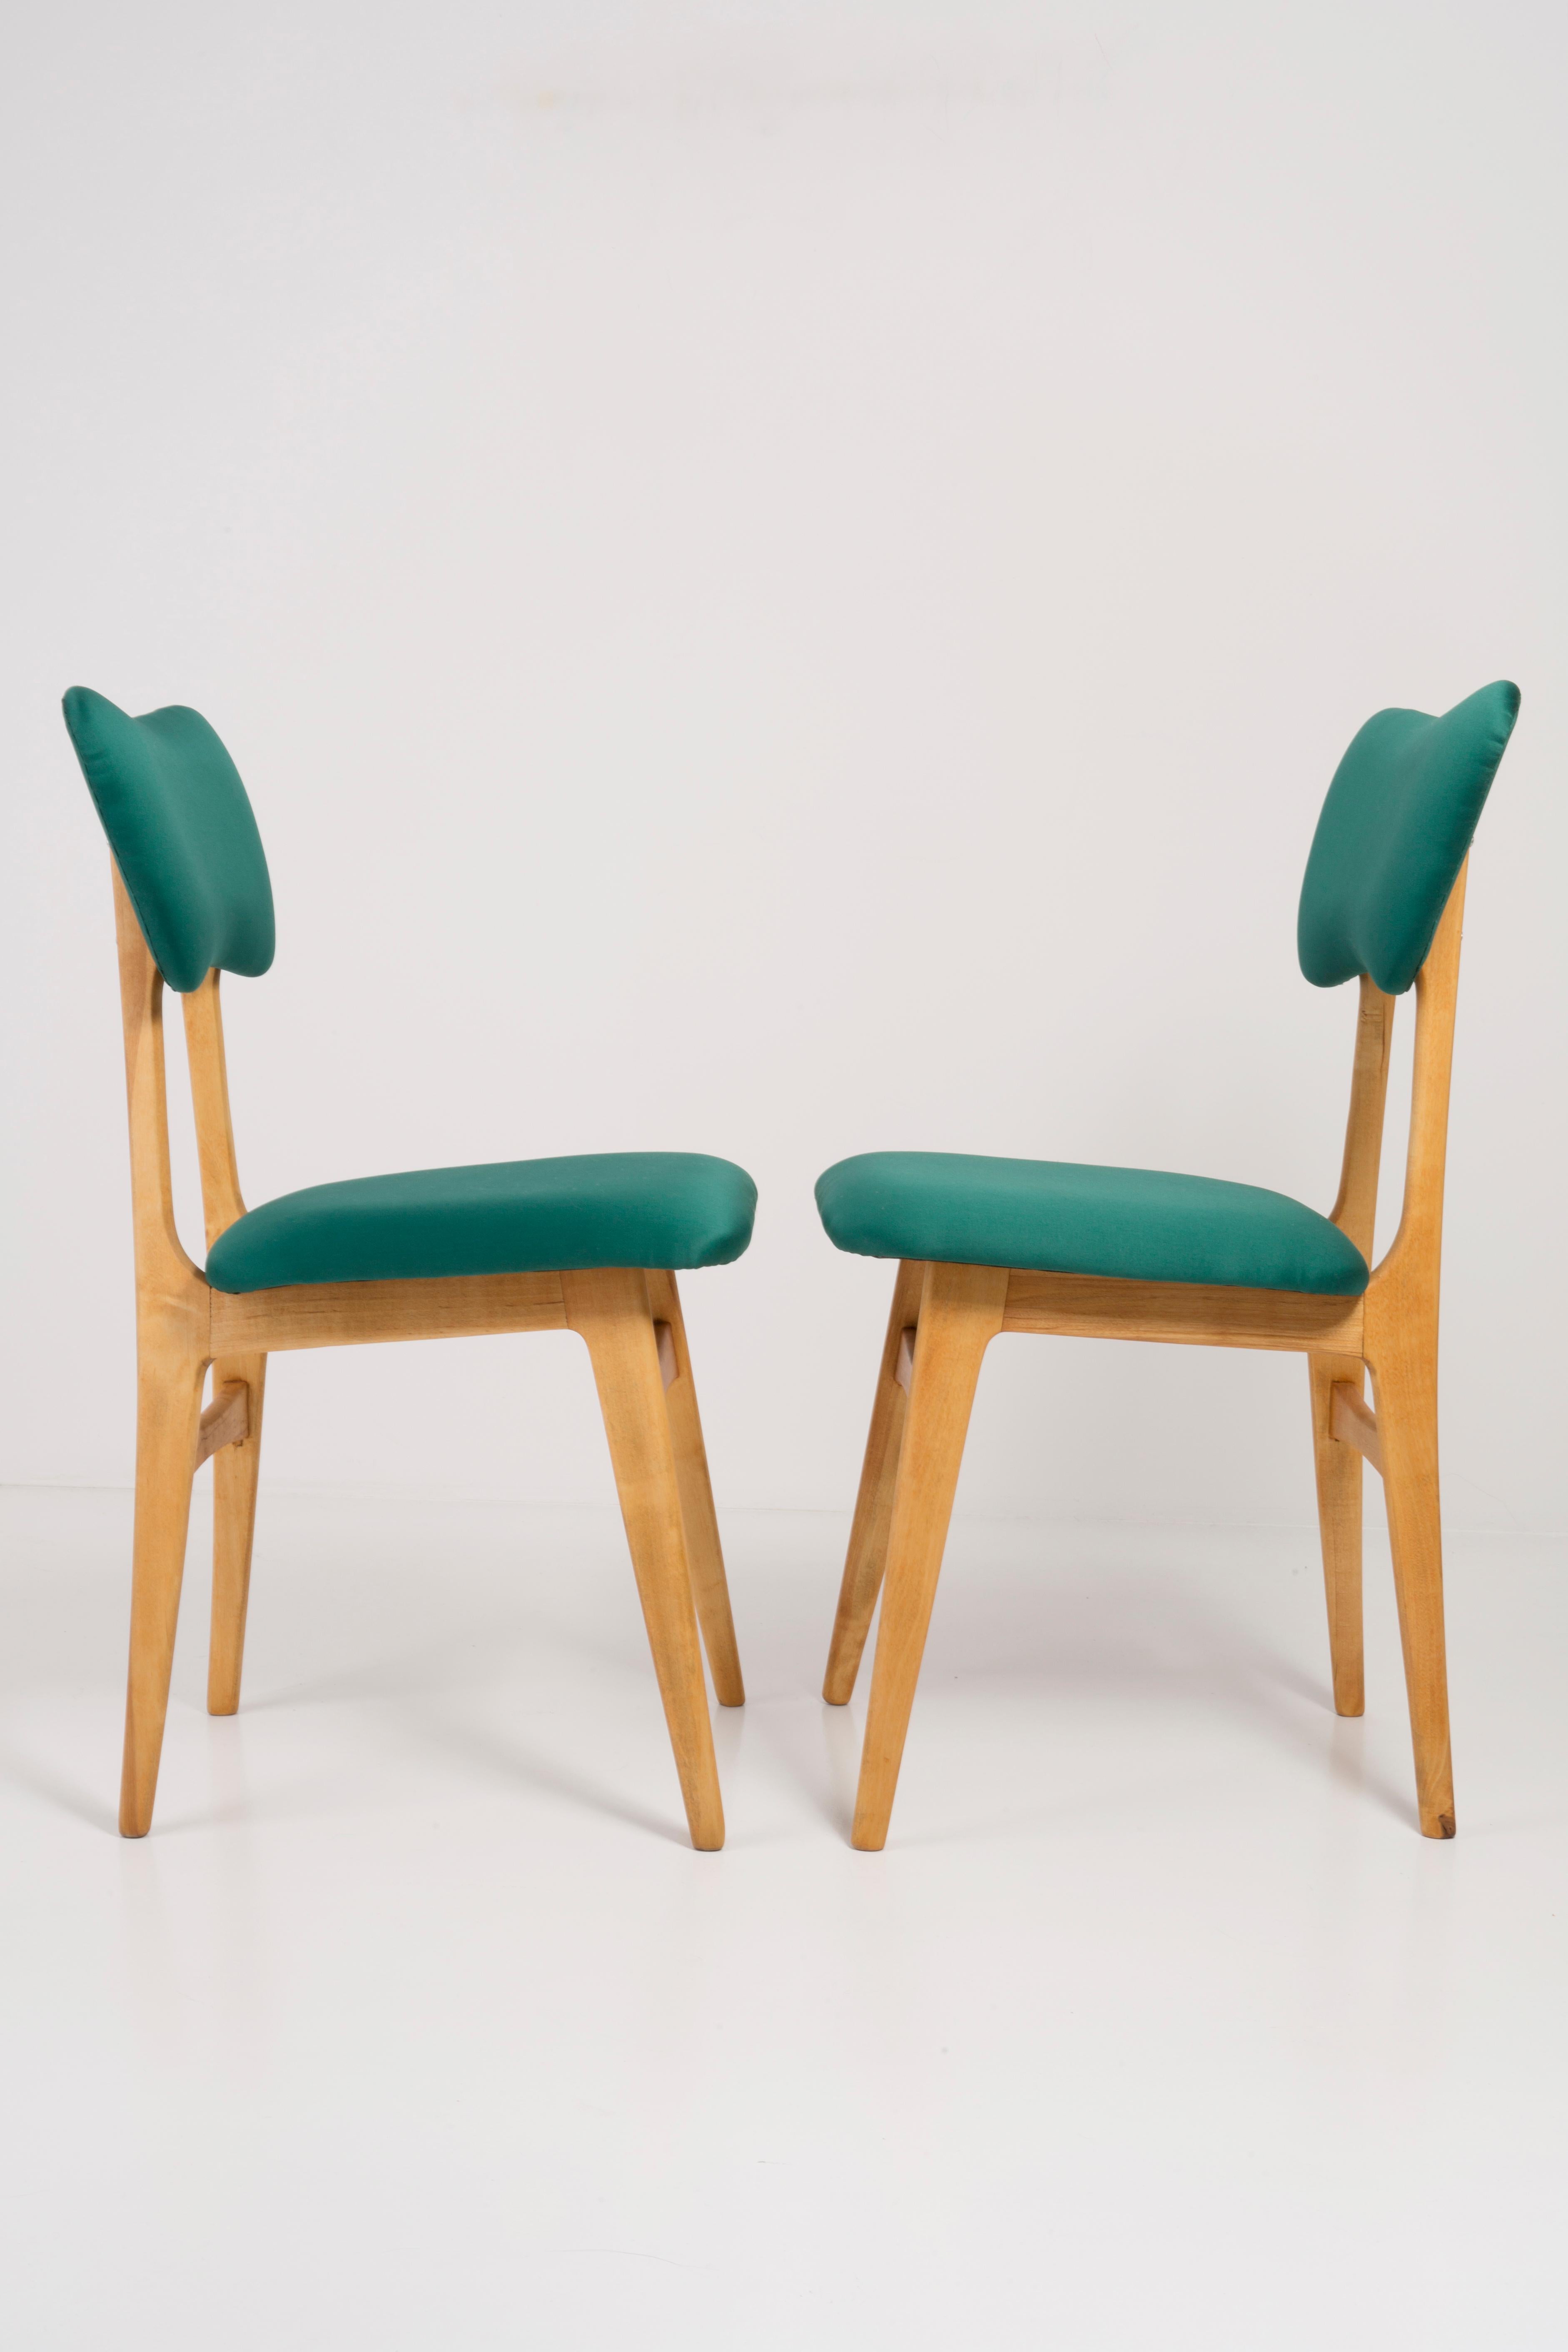 Chairs designed by Prof. Rajmund Halas. Made of beechwood. Chair is after a complete upholstery renovation; the woodwork has been refreshed. Seat and back is dressed in green, beautiful, high quality Dedar Tabularasa fabric. Tablarasa is an